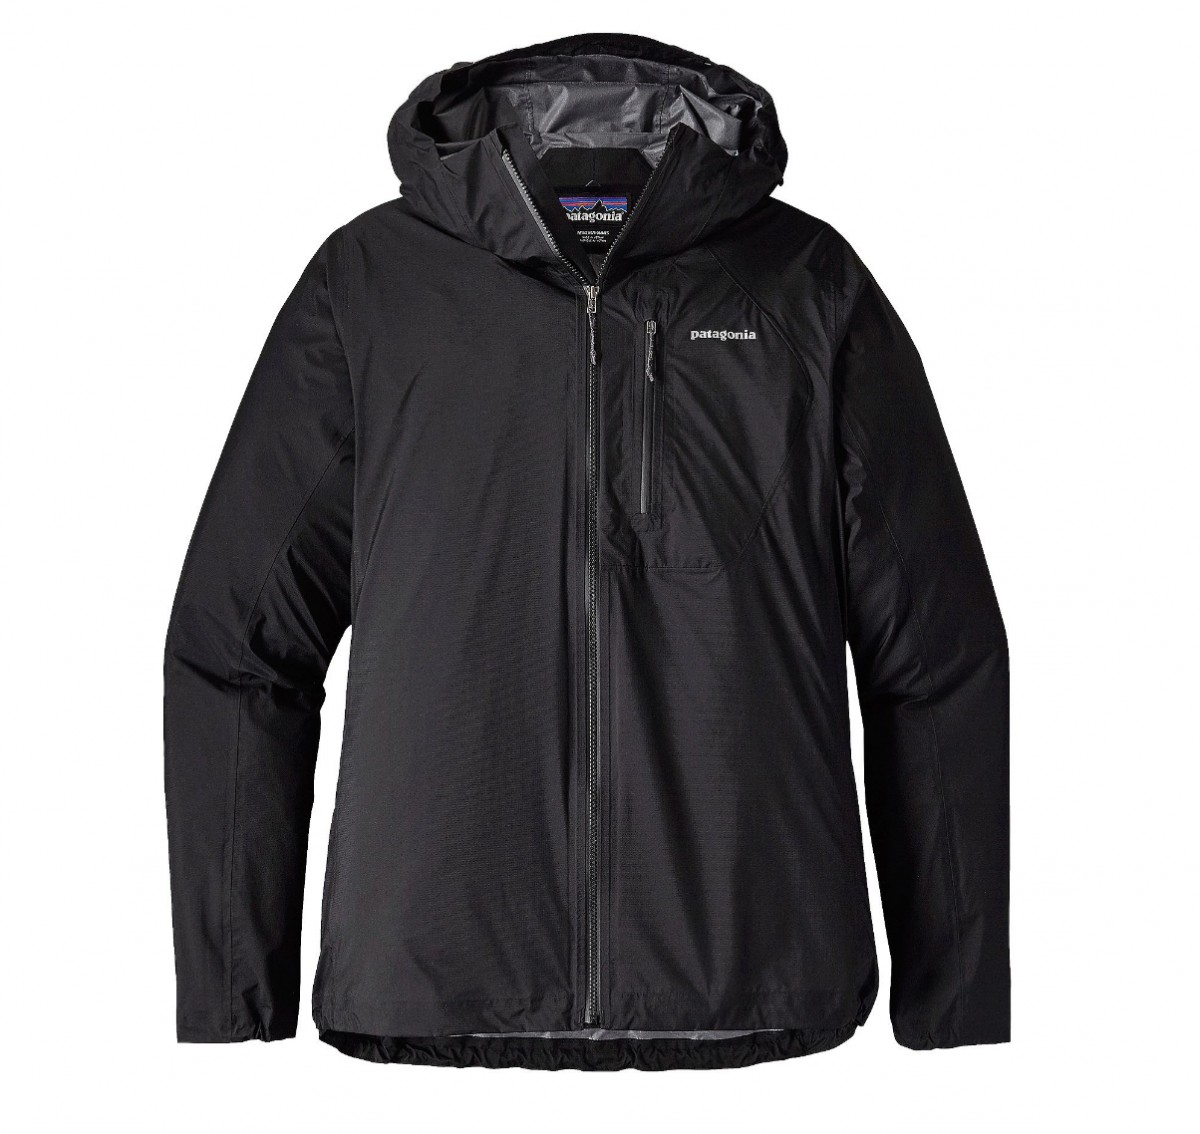 Patagonia Storm Racer Review